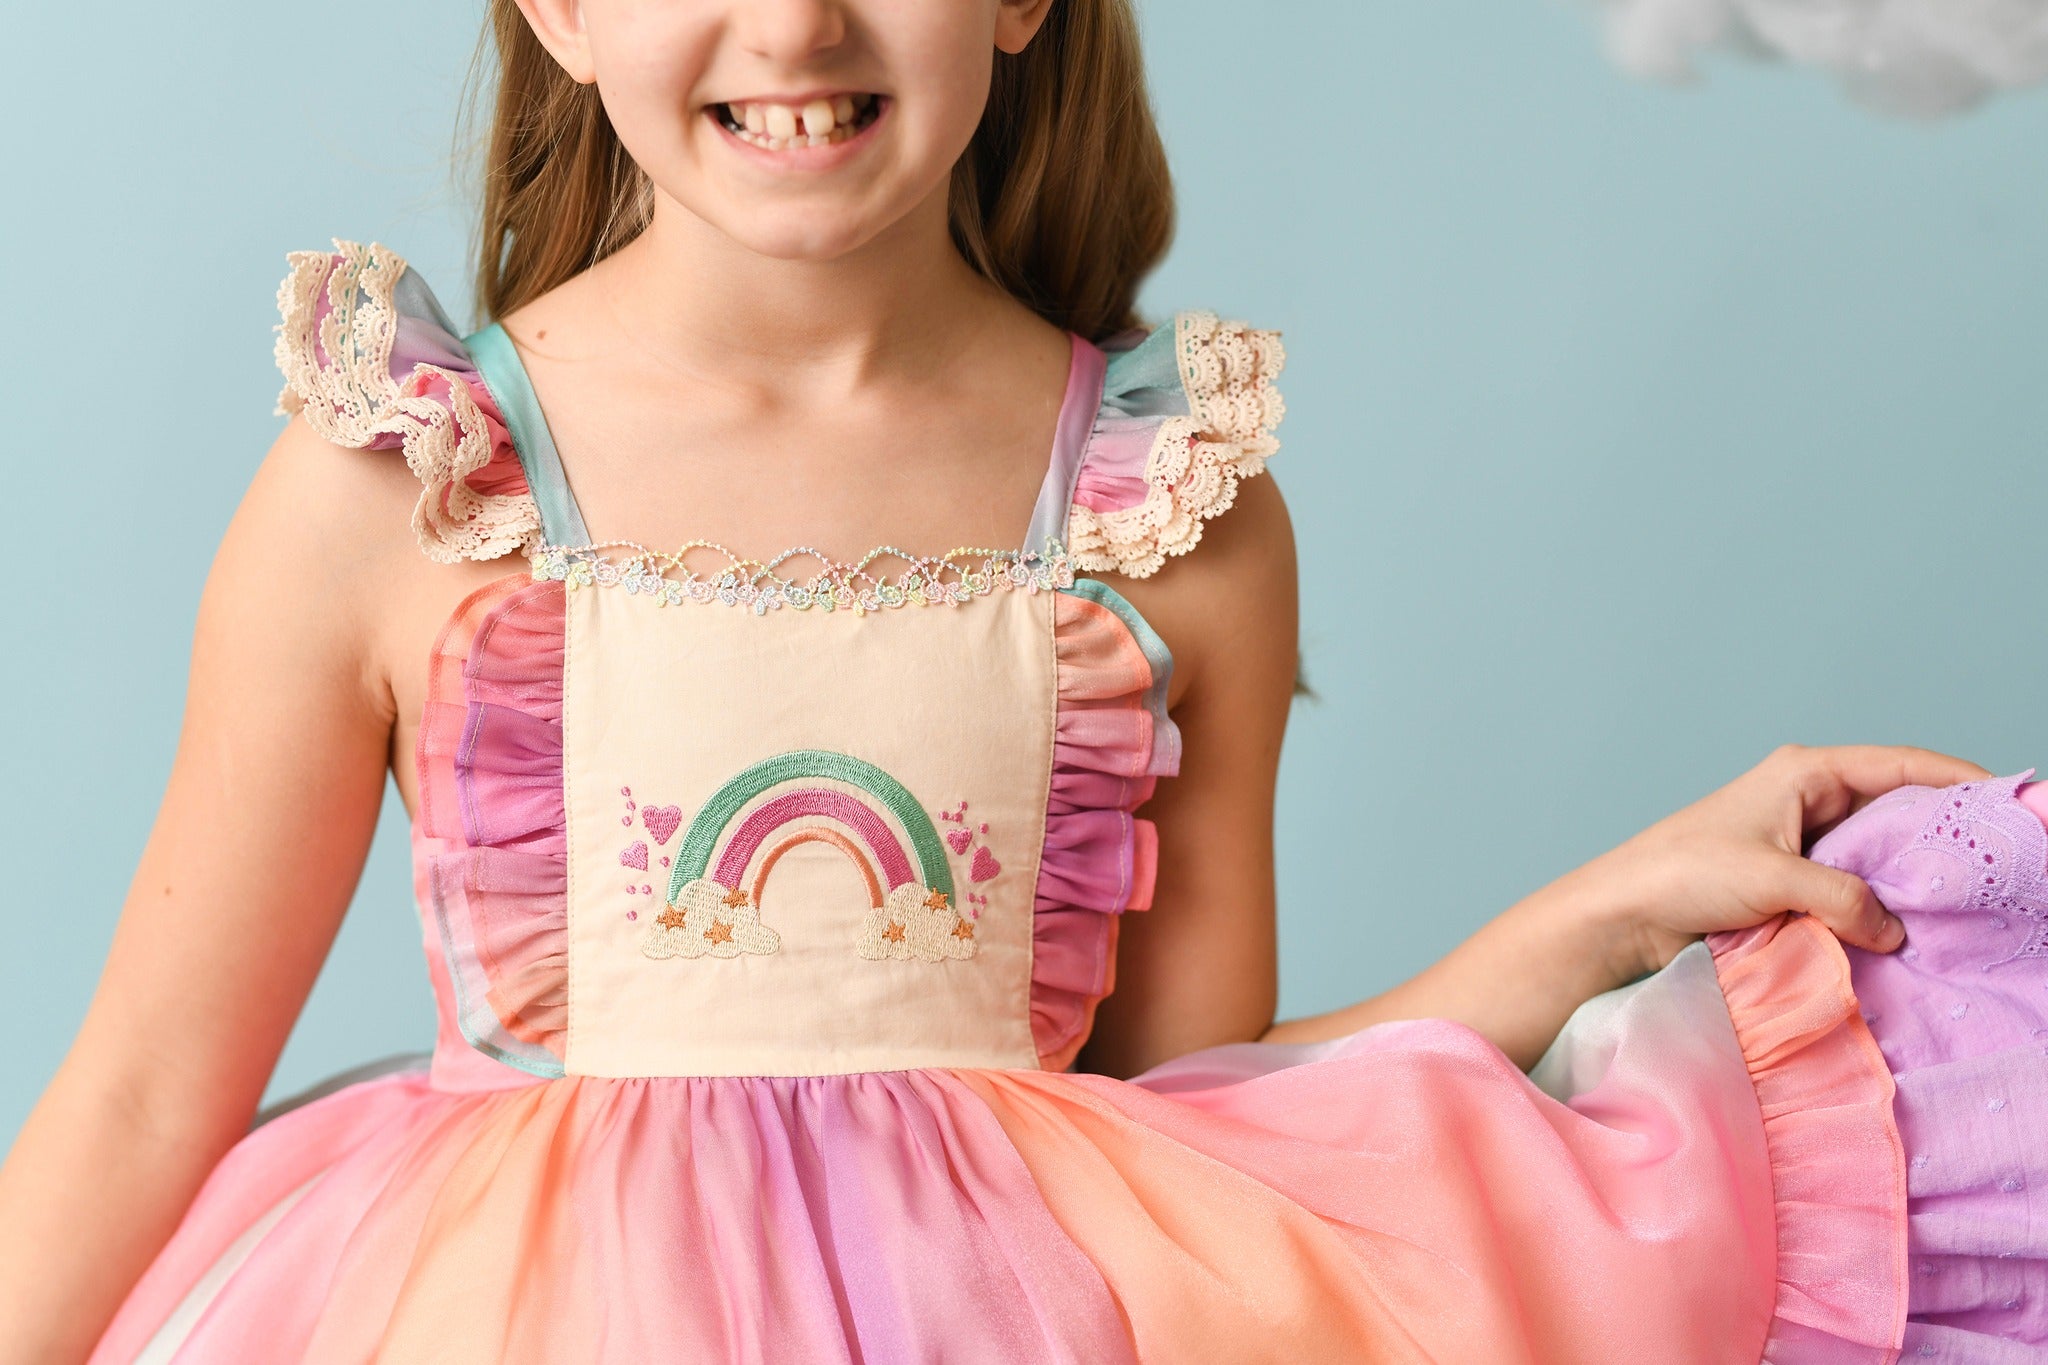 RAINBOW DREAMS by Finnegan and Lace Vintage inspired Dress Set (Includes Bow, Shorts and detach apron)